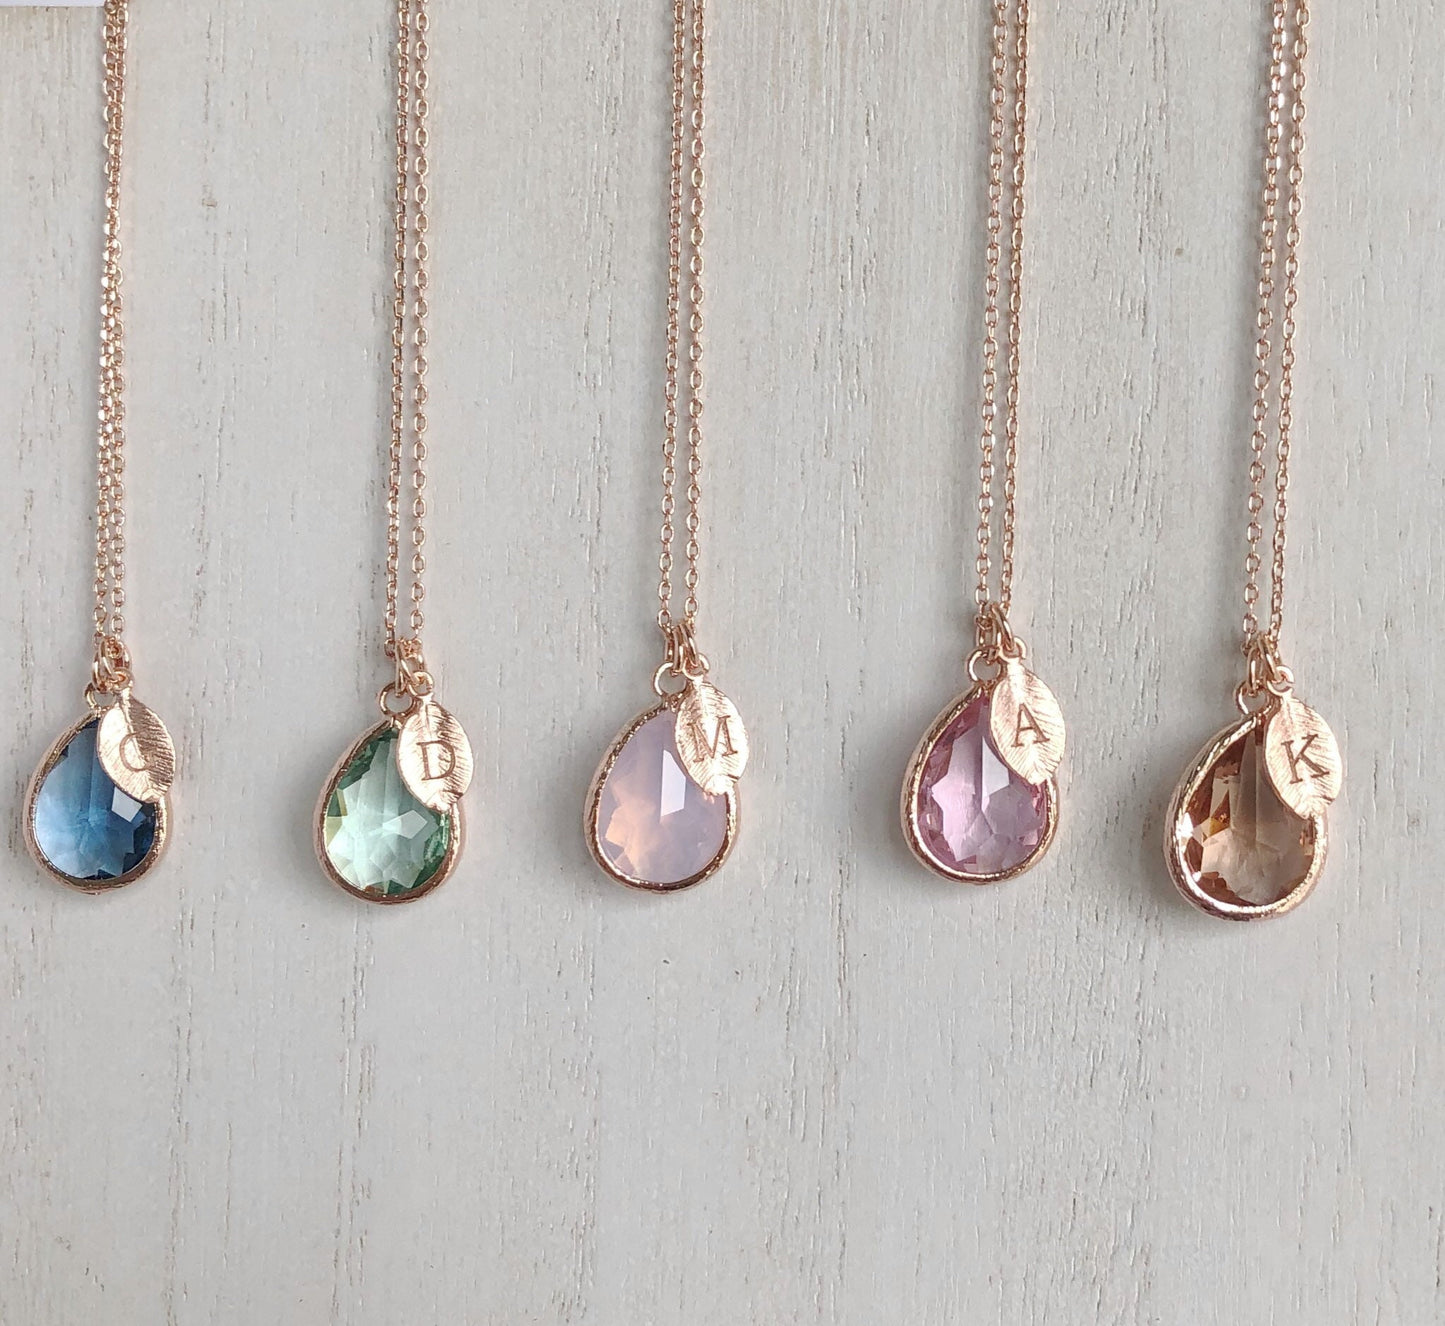 Necklaces for women, birthday gift for her, initial necklace, charm necklace, rose gold necklace, opal necklace, jewelry